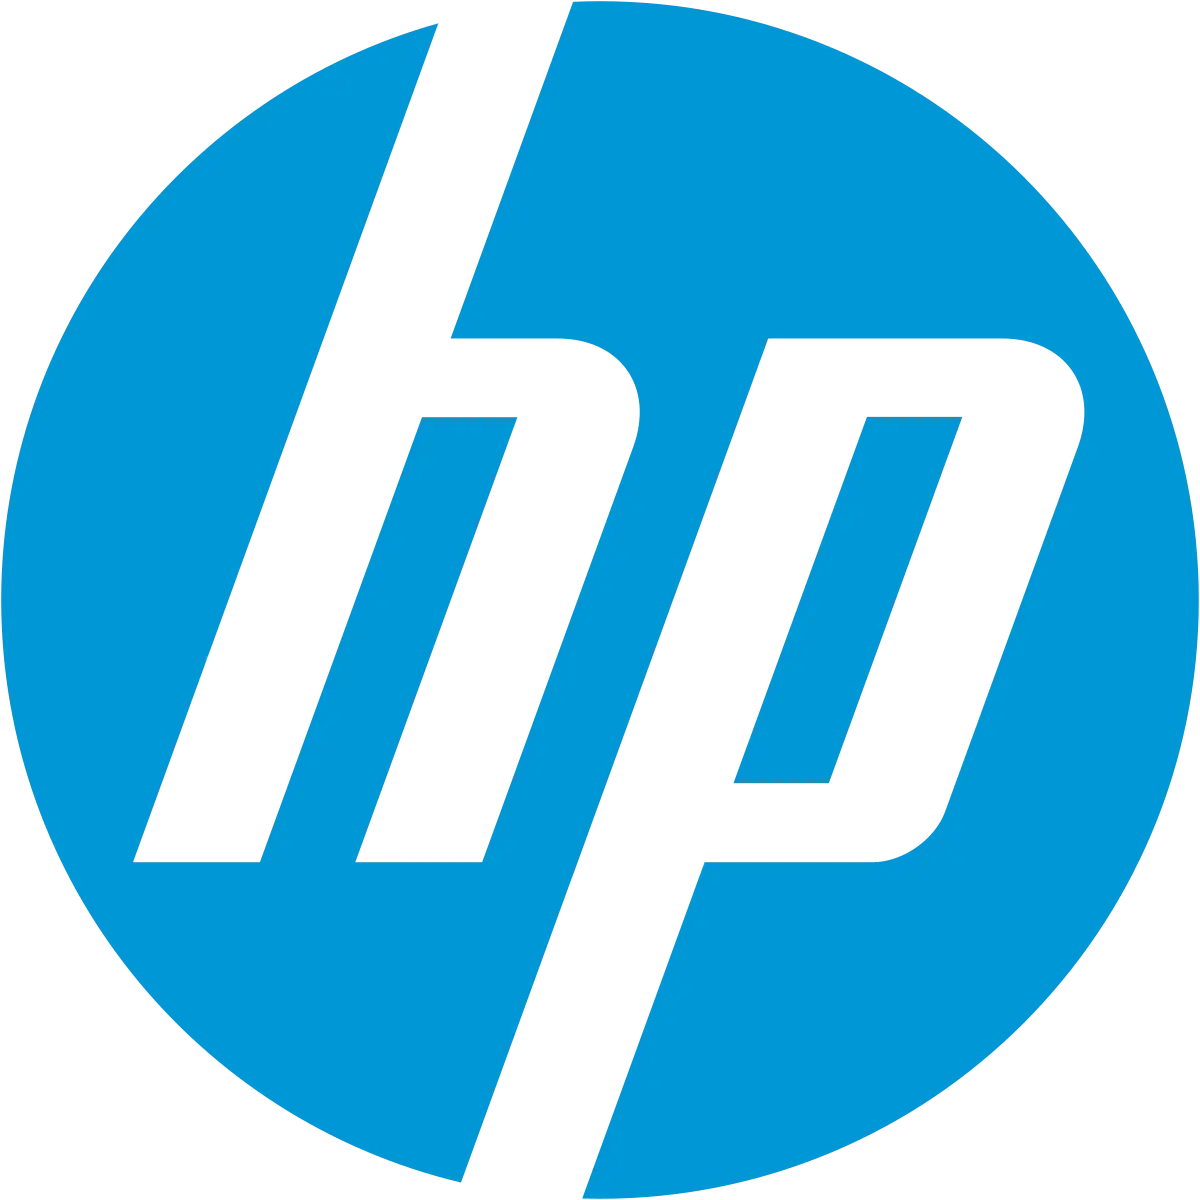 hewlett packard pc - How old are HP computers